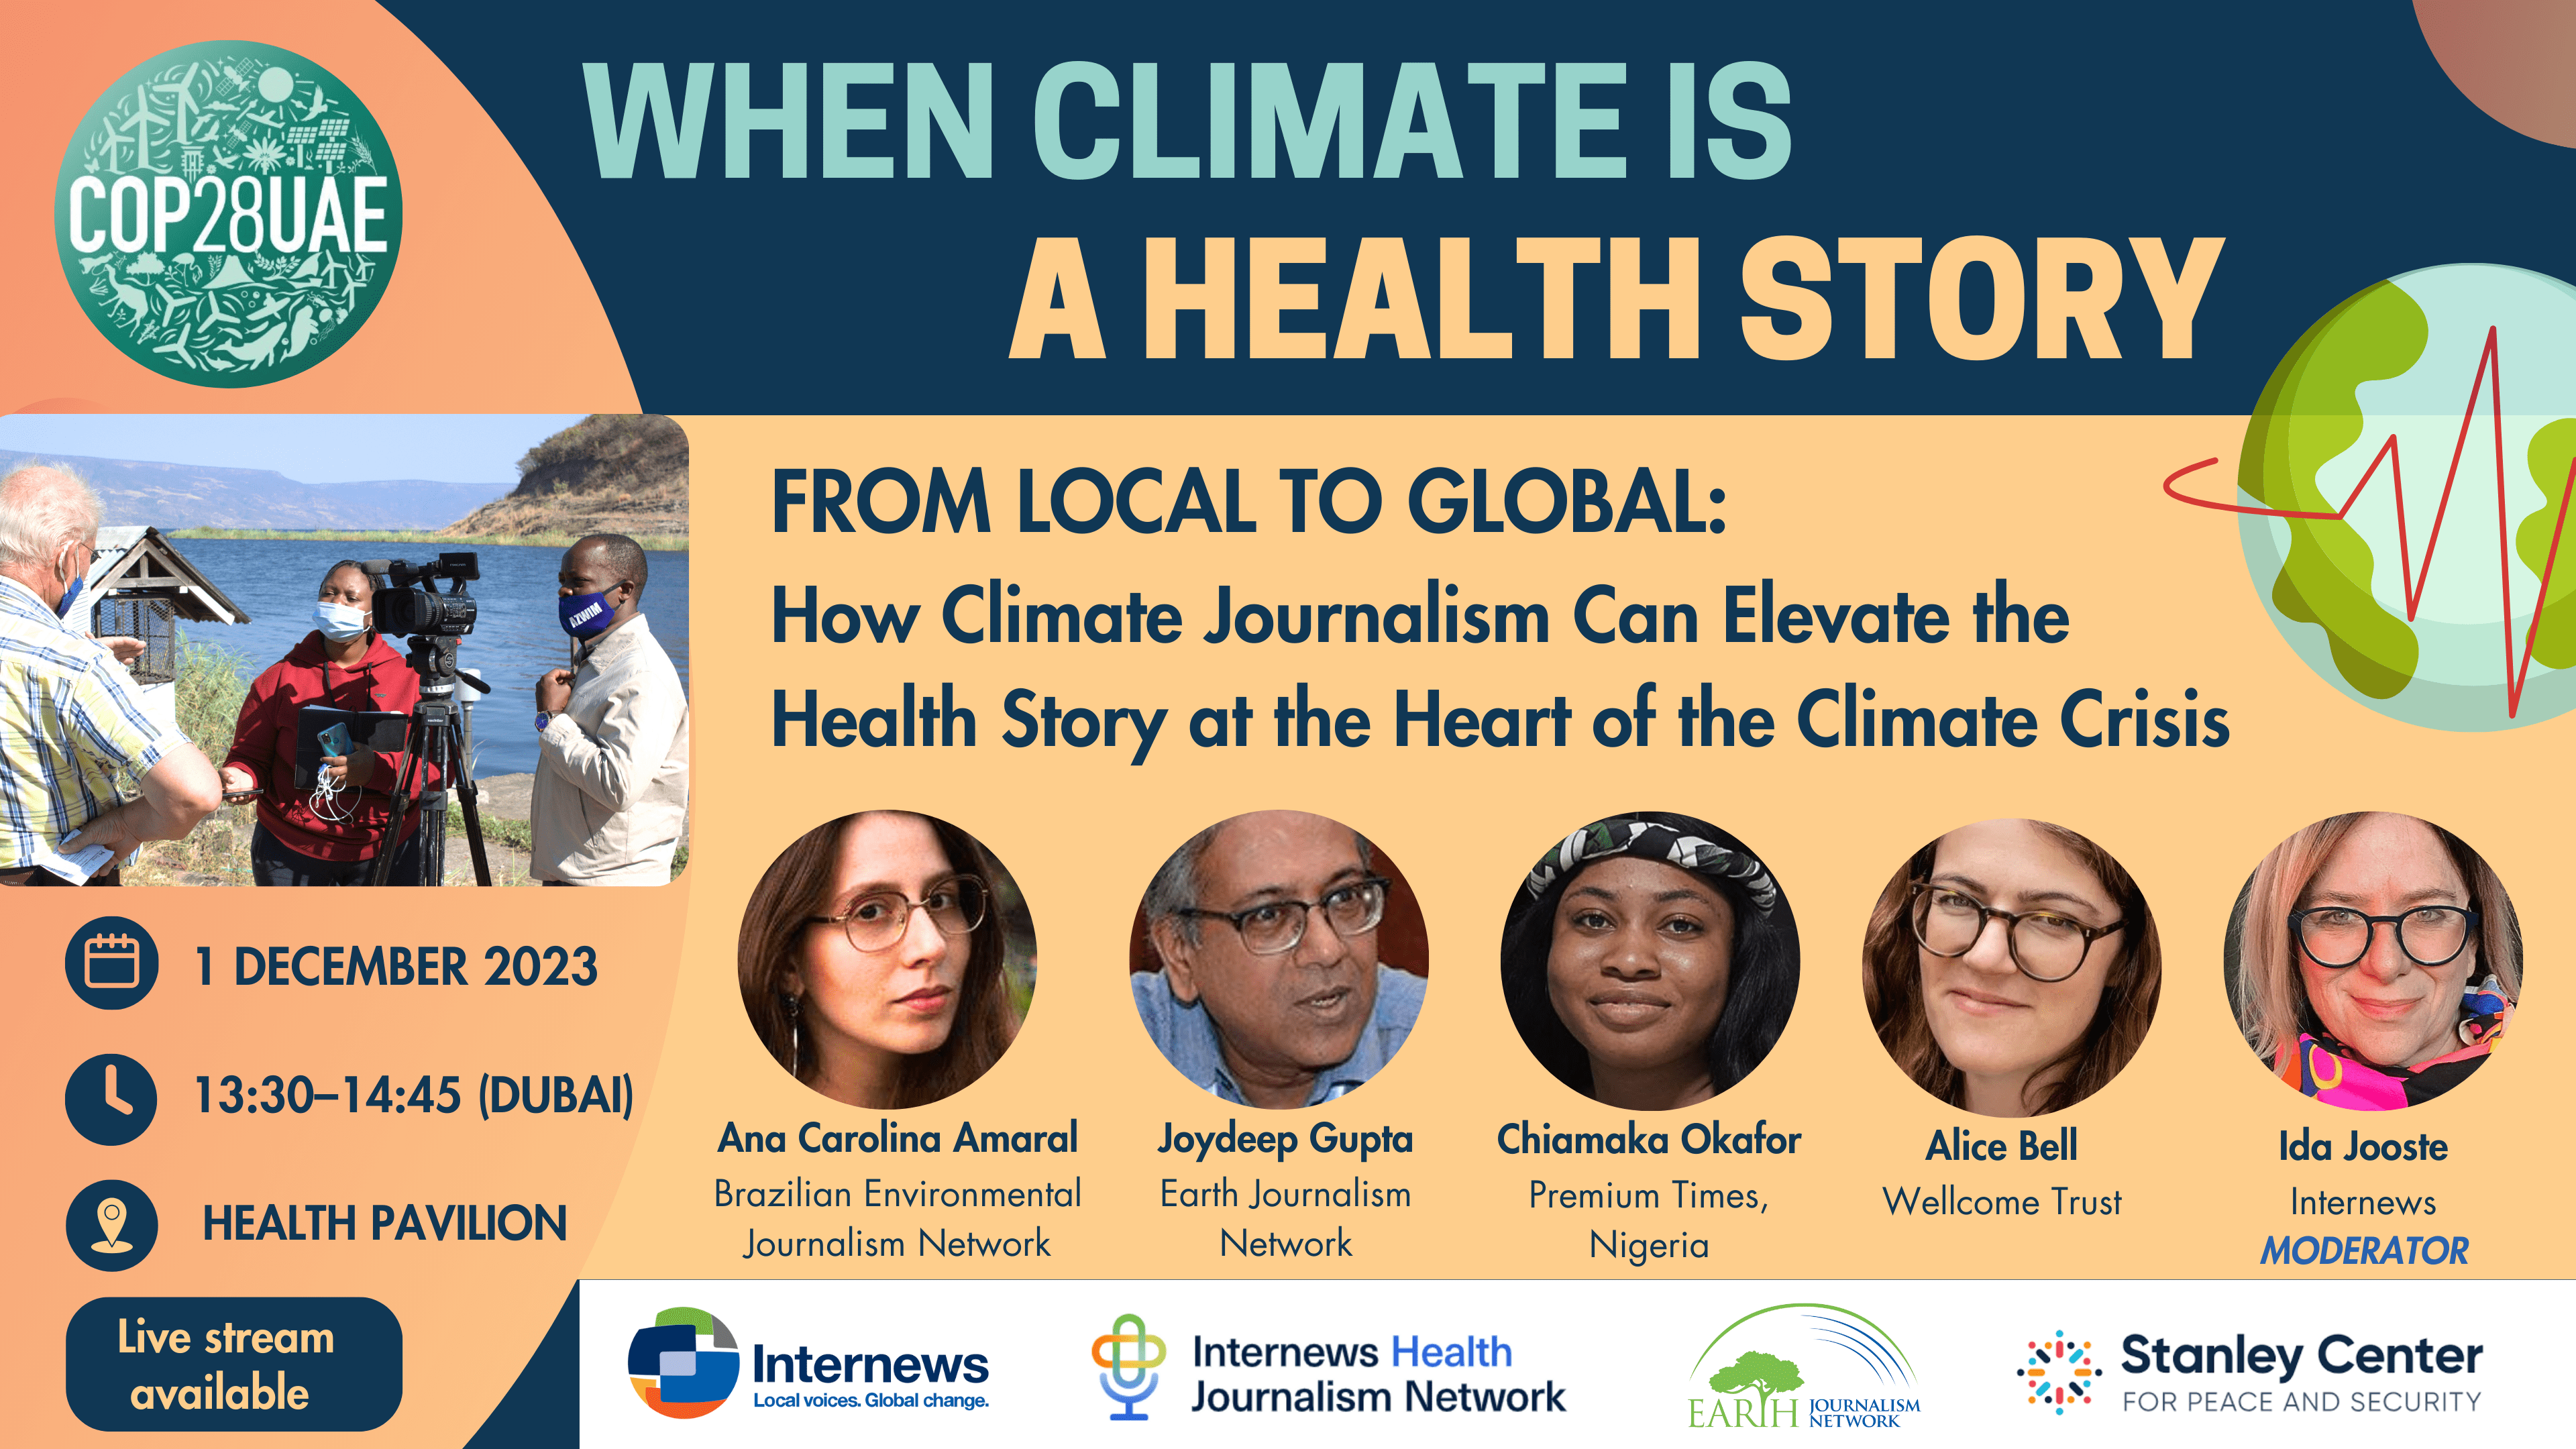 When Climate is a Health Story: How Climate Journalism Can Elevate the Health Story at the Heart of the Climate Crisis